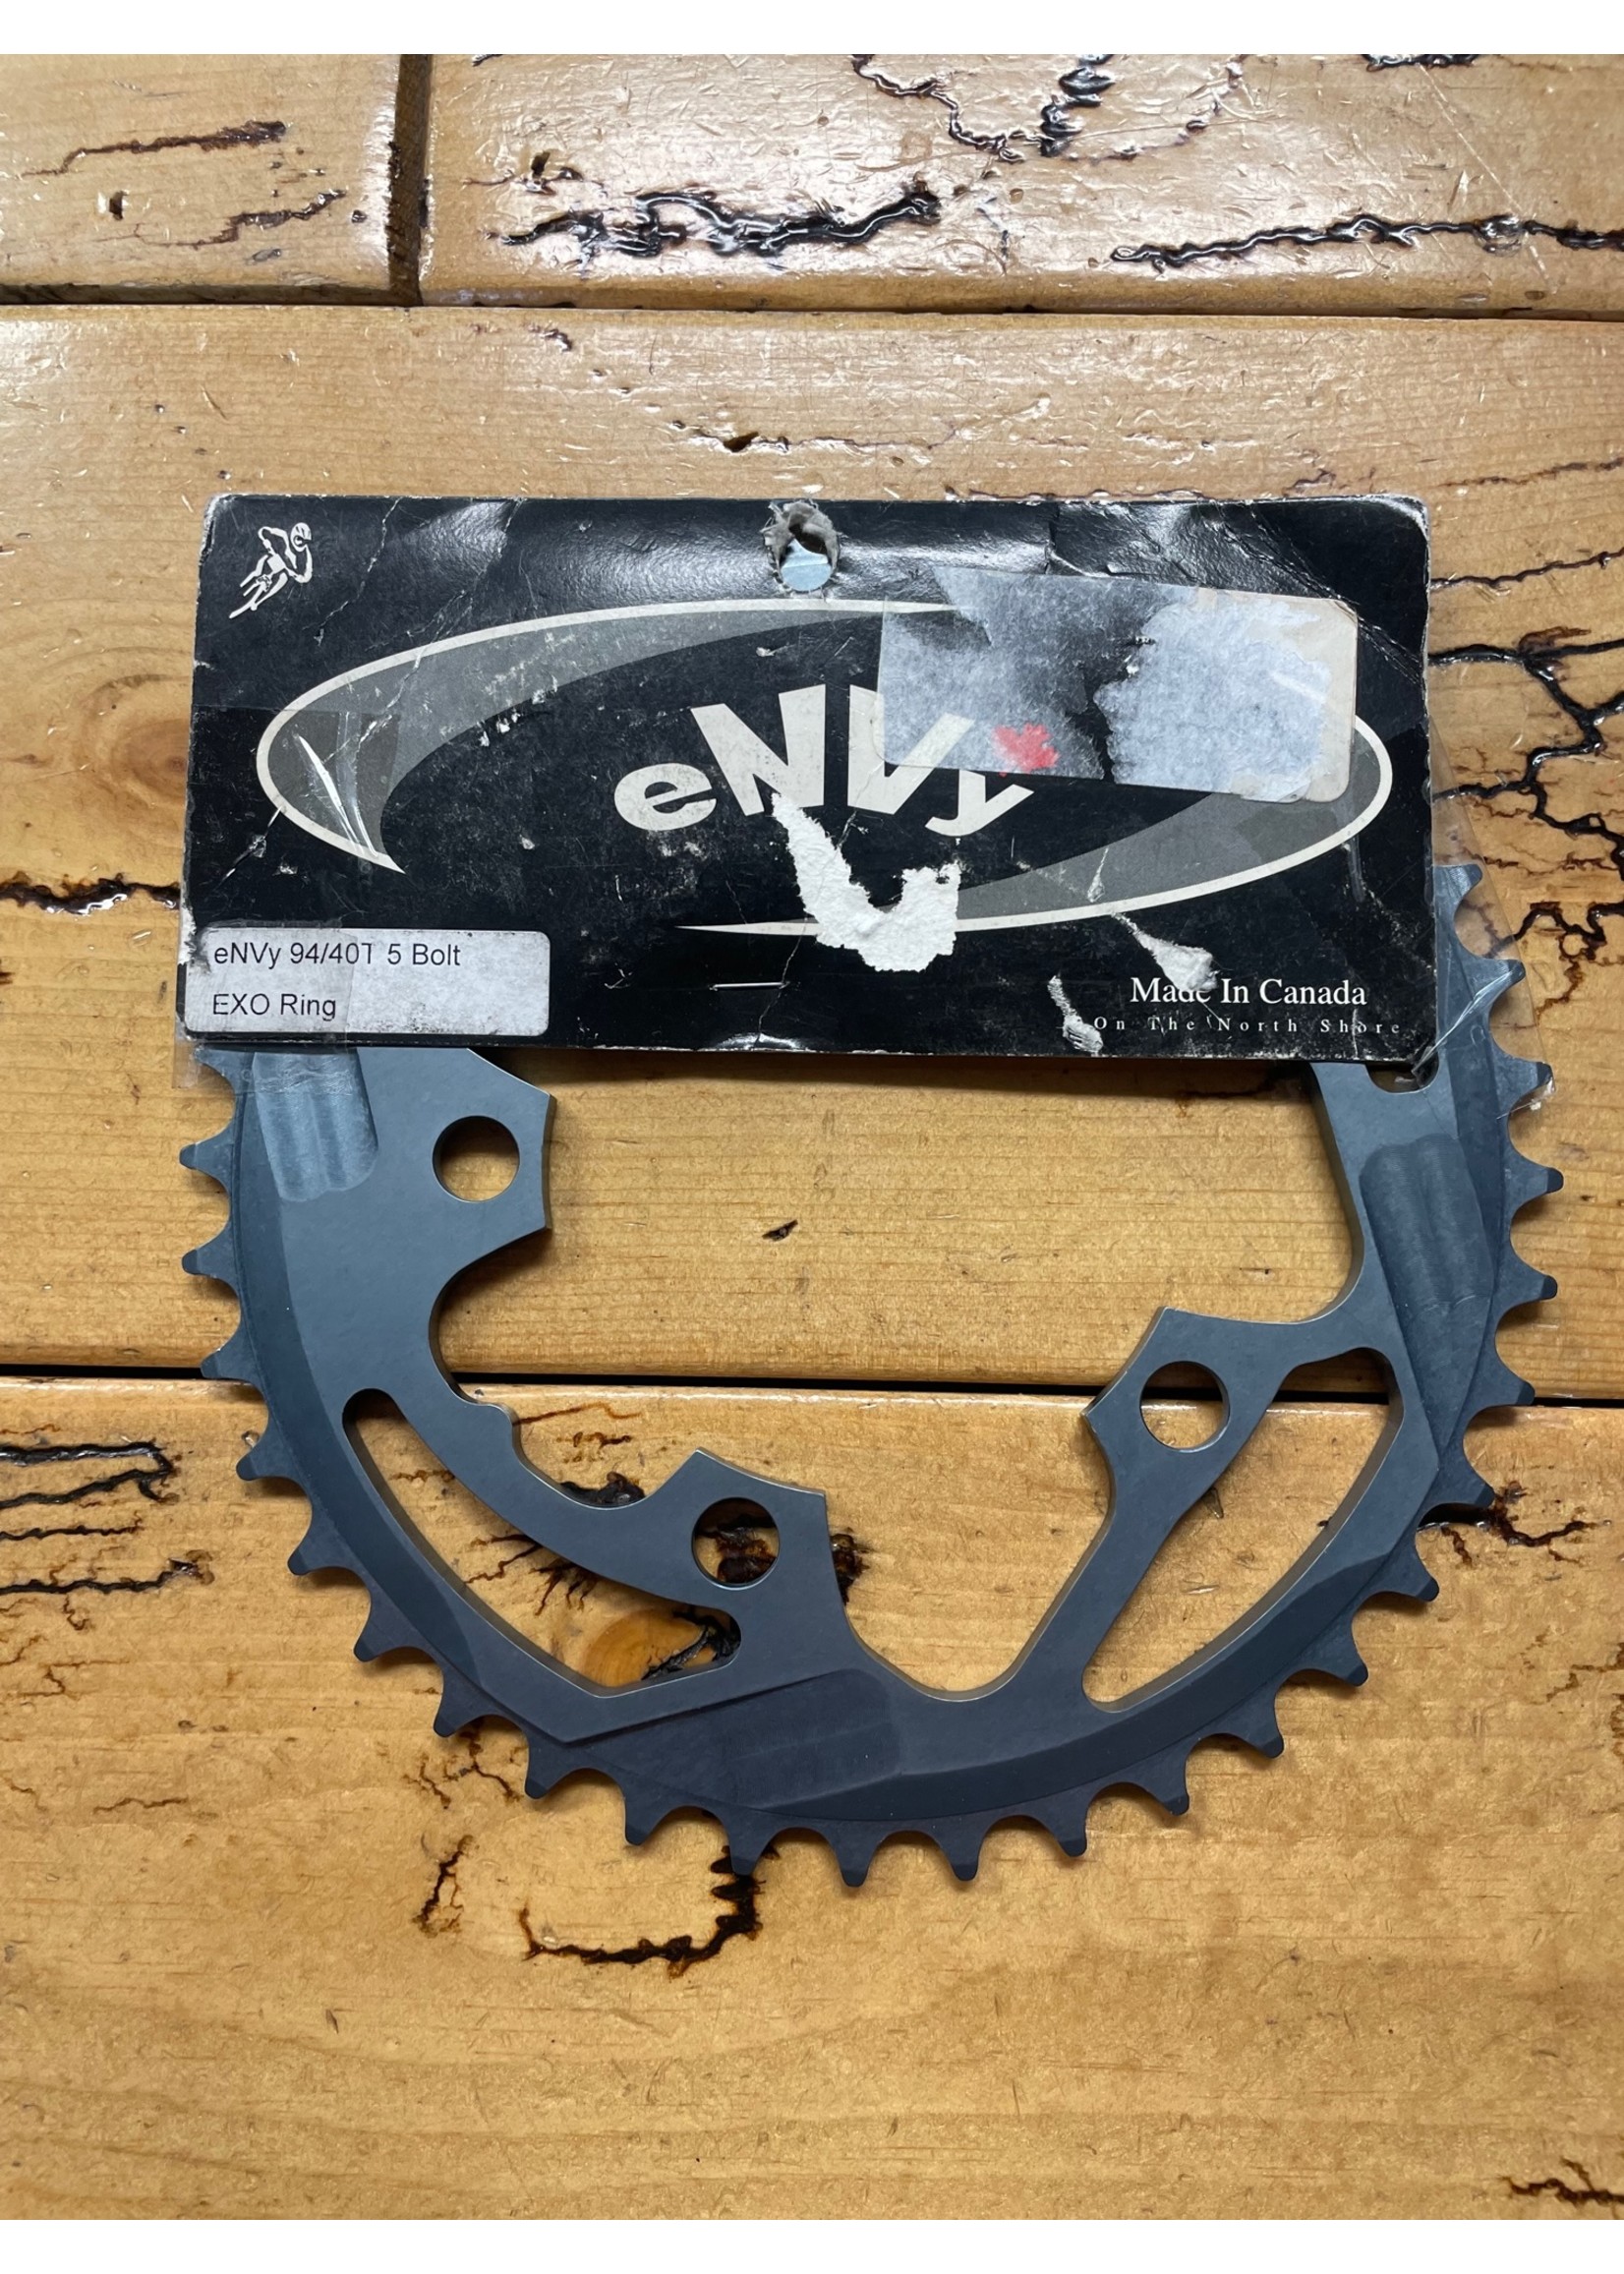 Envy Envy EXO 40 Tooth 5 Bolt 94 BCD Chainring